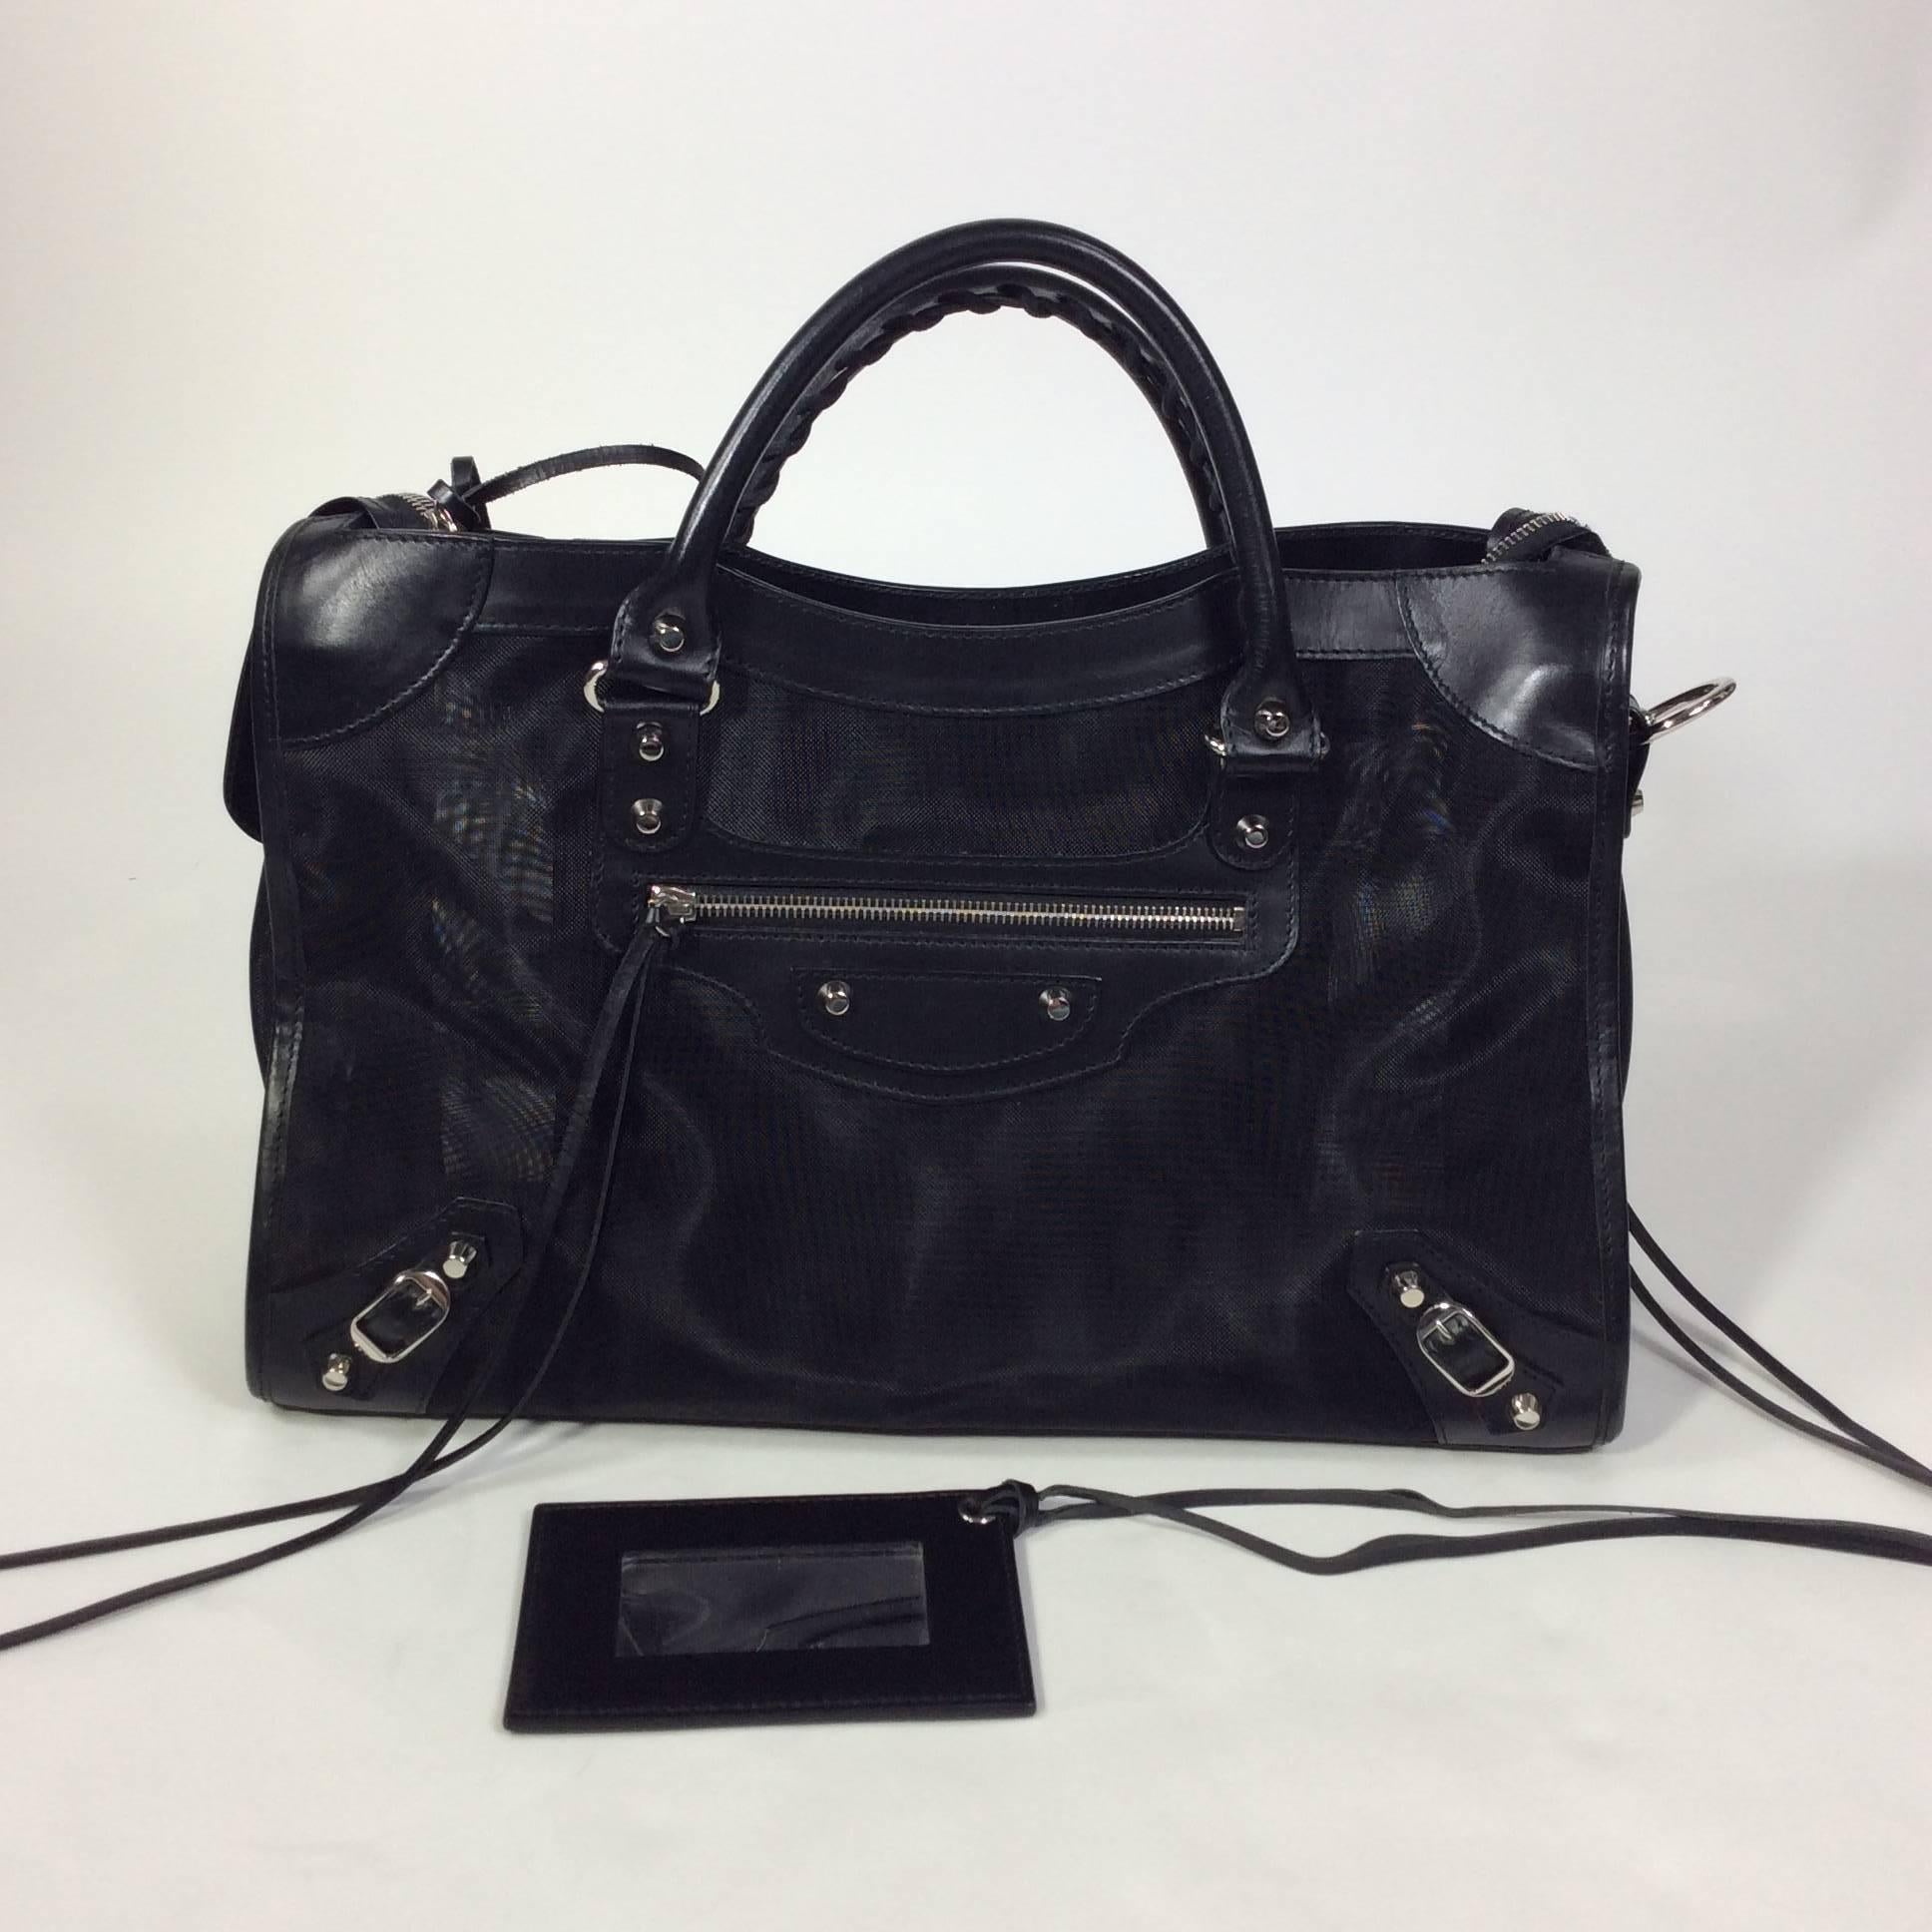 Balenciaga Black Mesh with Leather Trim and Silver Hardware City Bag. The bag is in excellent condition with no visible signs of wear on the bag. The handles are 5